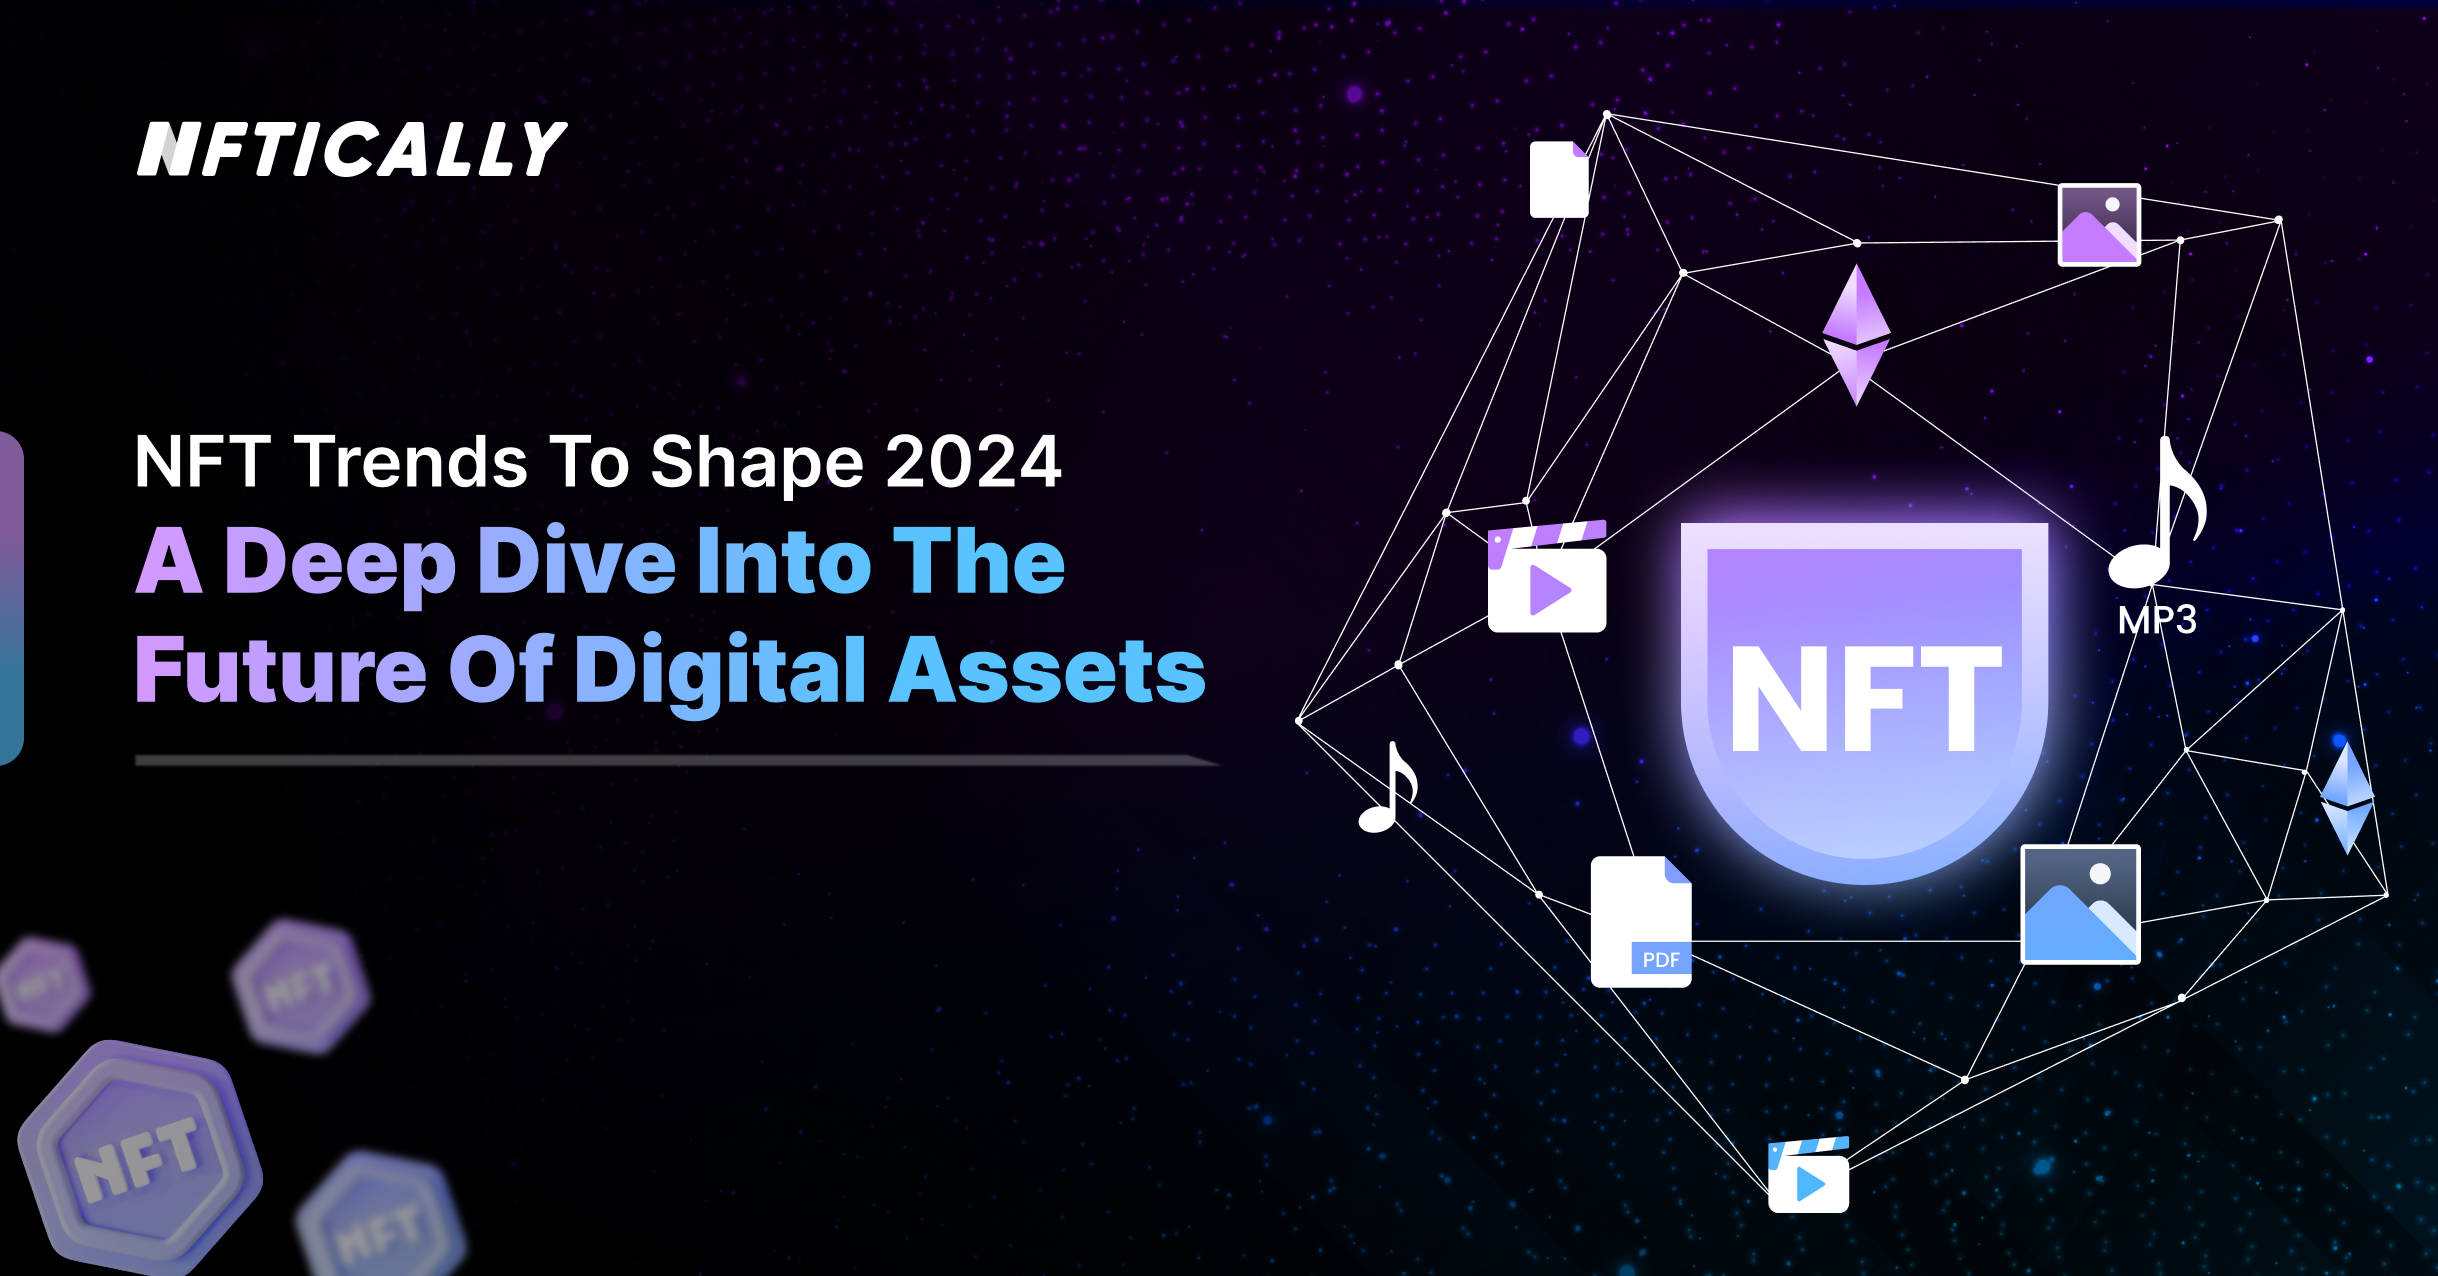 NFT Trends to Shape 2024: A Deep Dive into the Future of Digital Assets